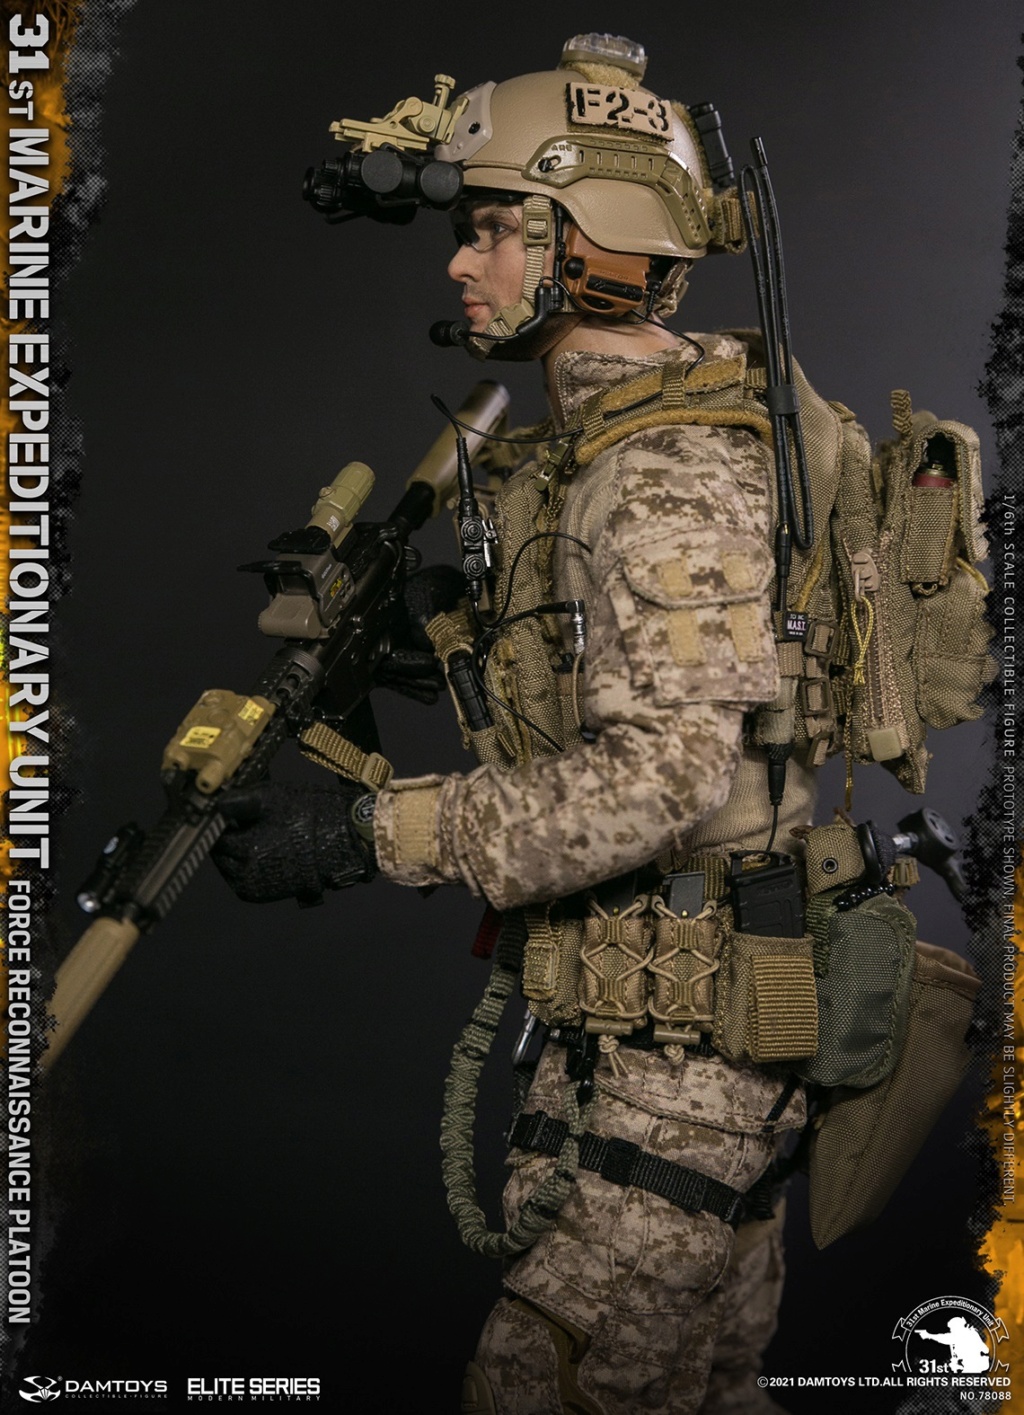 ModernMilitary - NEW PRODUCT: DAMTOYS: 1/6 U.S. Army 31st Marine Expeditionary Force Direct Reconnaissance Unit Reconnaissance Platoon s78088 14572410